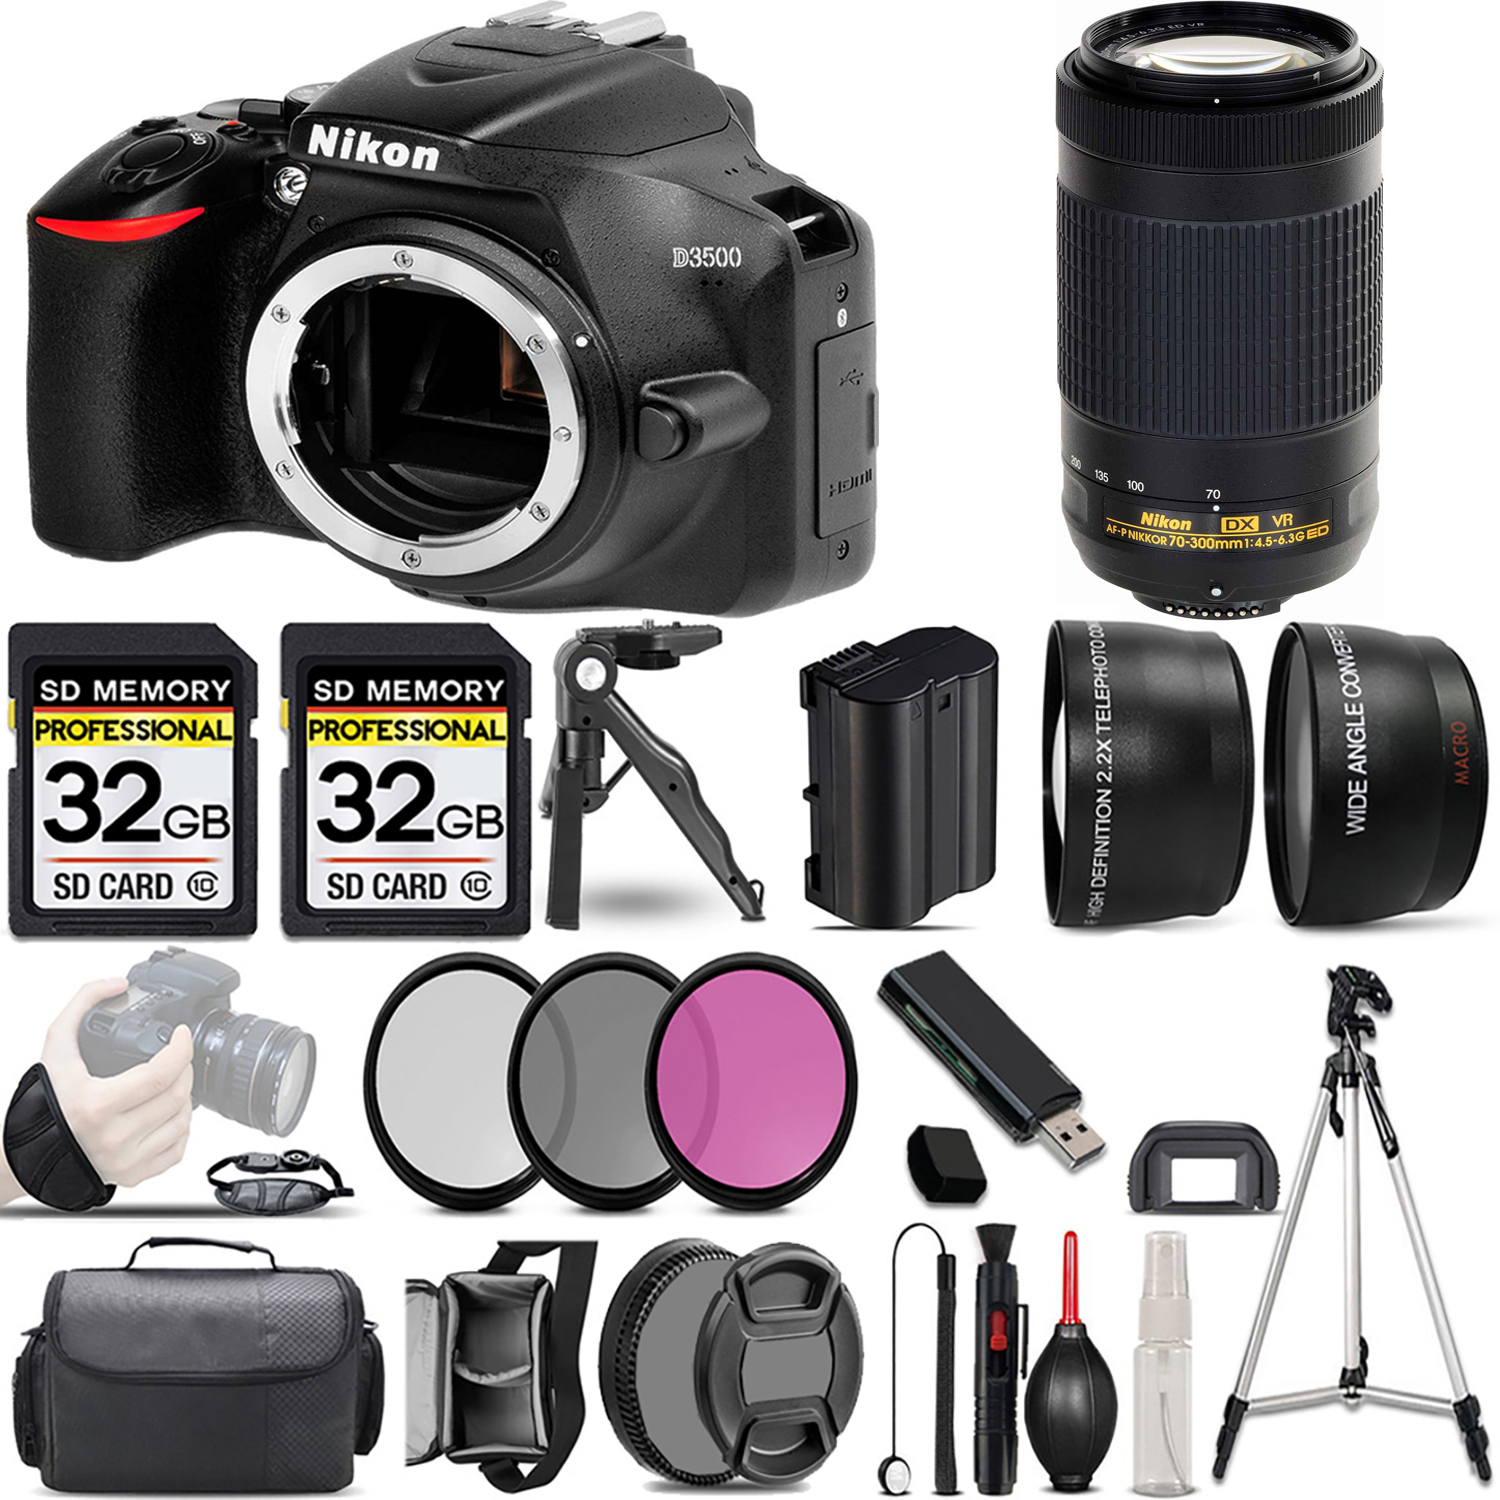 D3500 DSLR Camera (Body Only) + 70- 300mm VR Lens + 3 Piece Filter Set + 64GB *FREE SHIPPING*